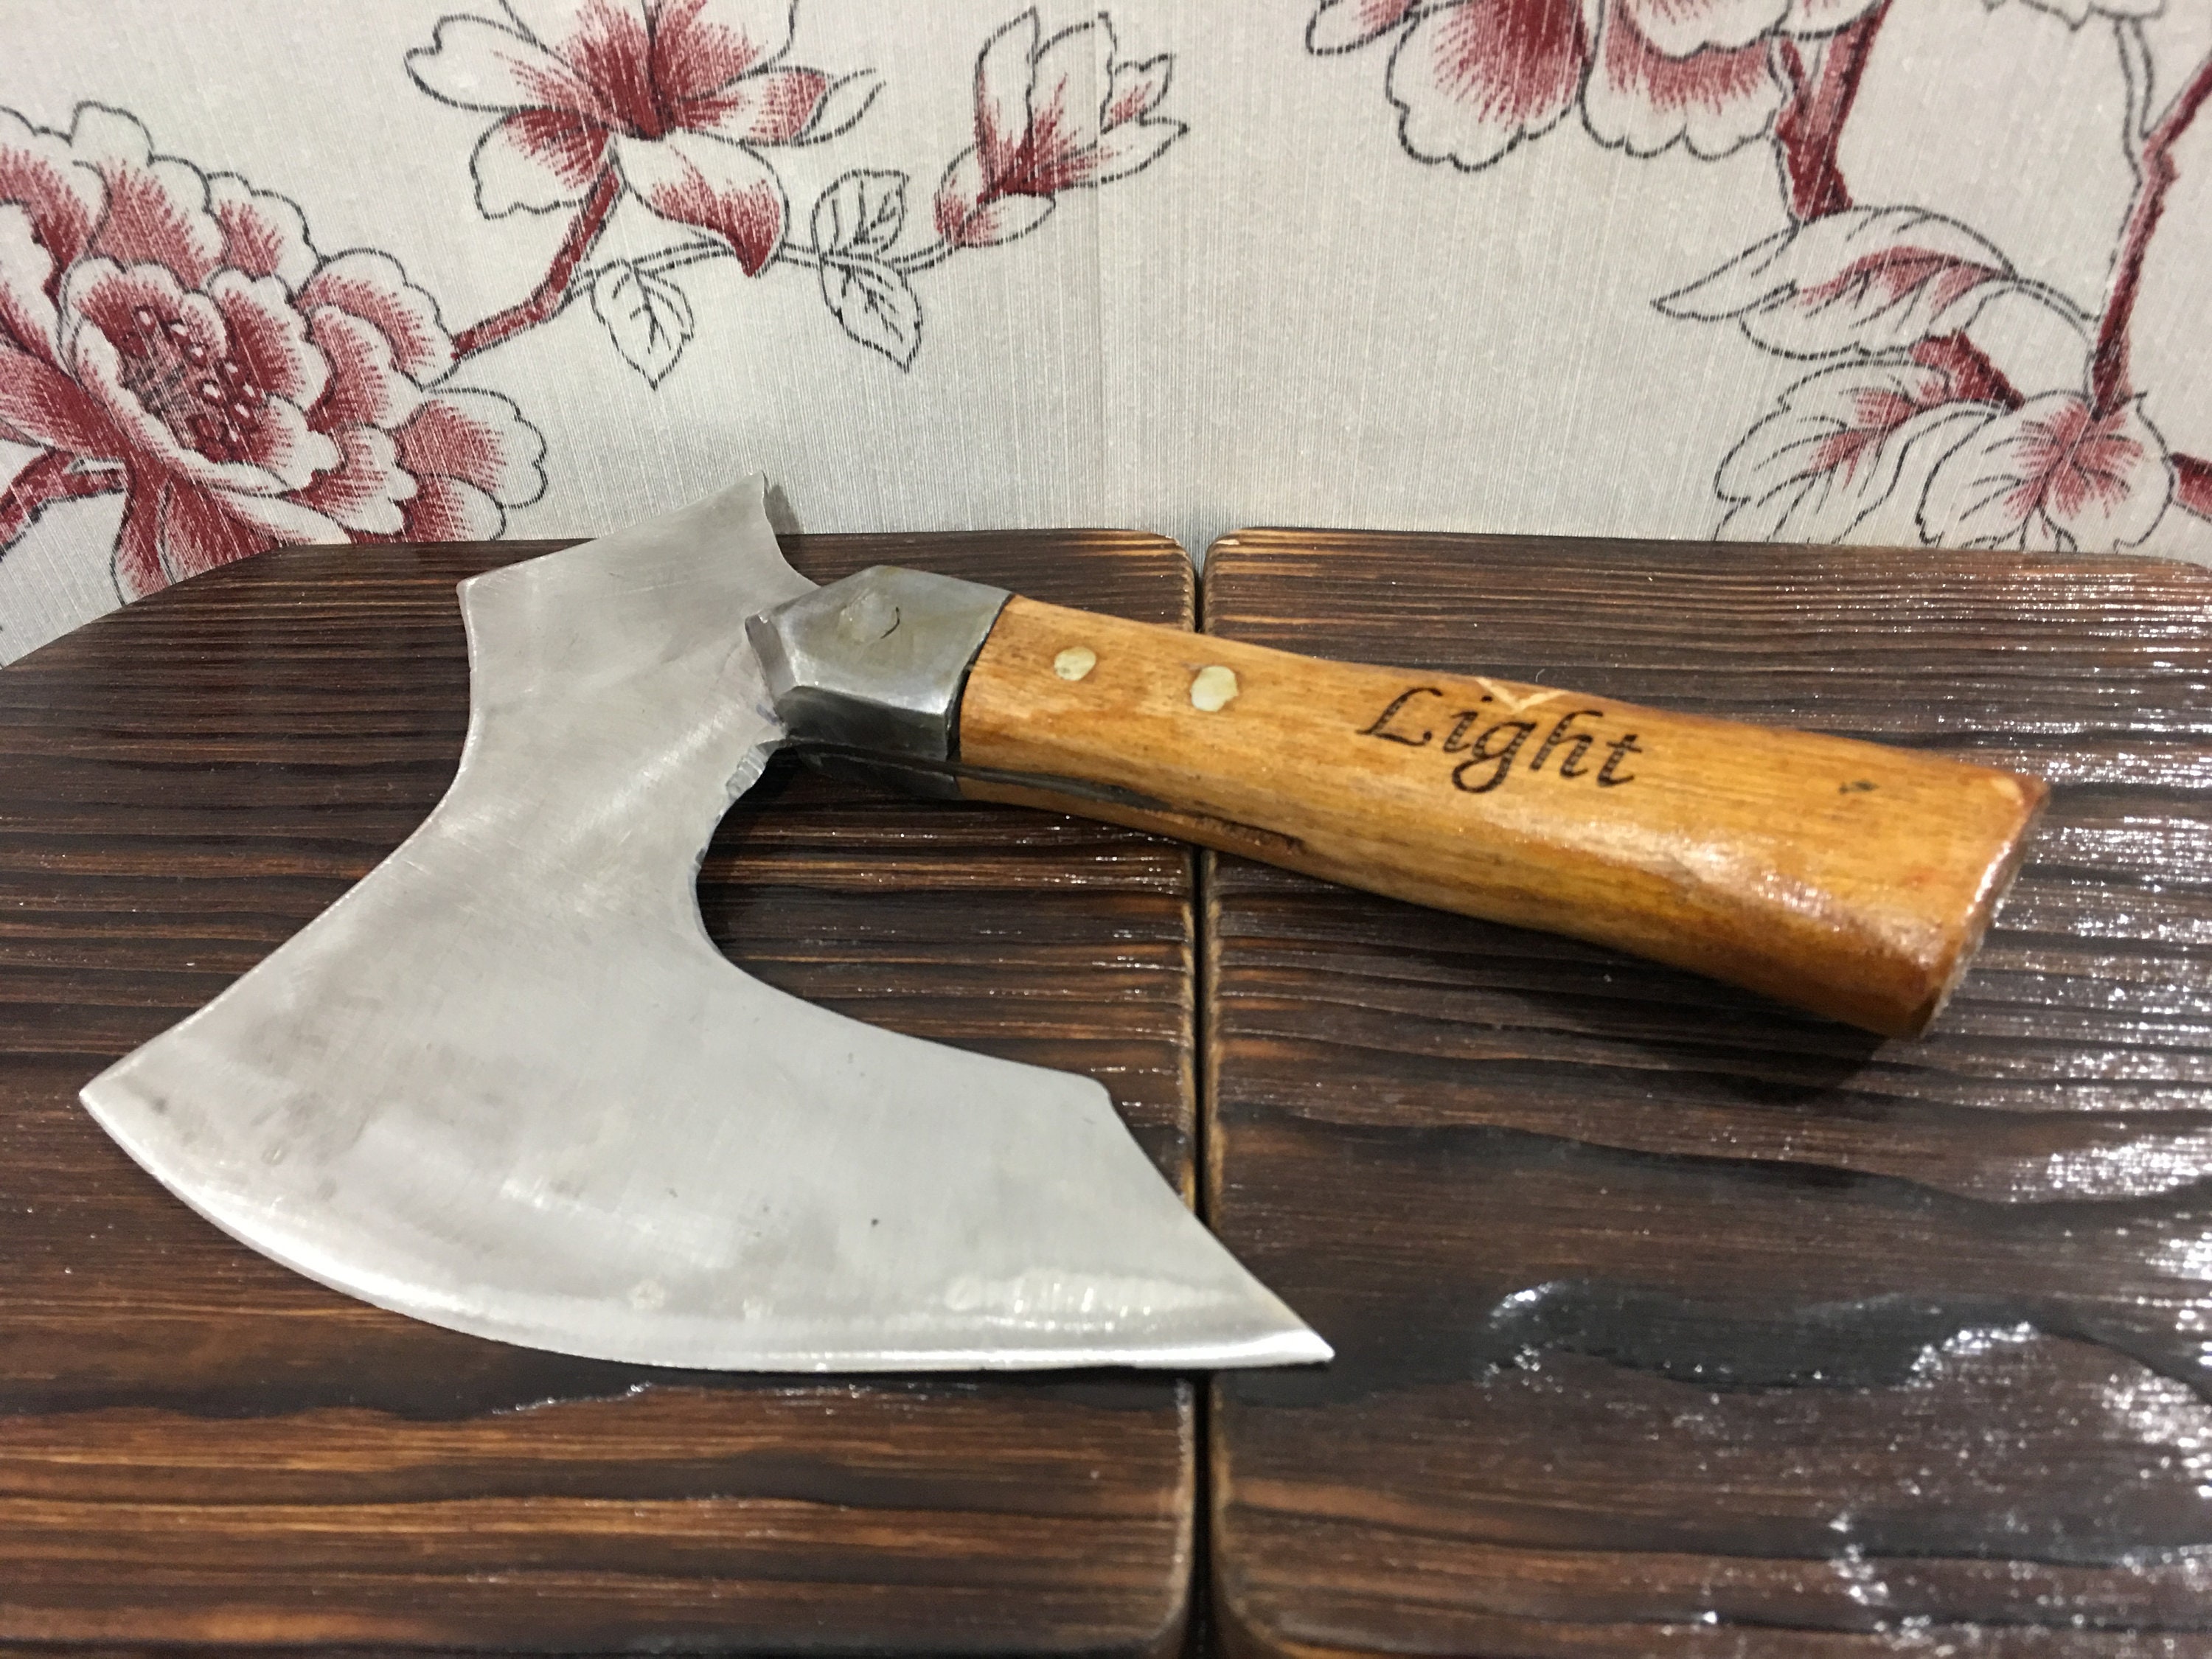 Stainless steel kitchen axe, kitchen hatchet, kitchen chopper, kitchen  gift, kitchen gadgets,butcher knife,meat chopper,chef gift,viking axe :  Handmade Products 